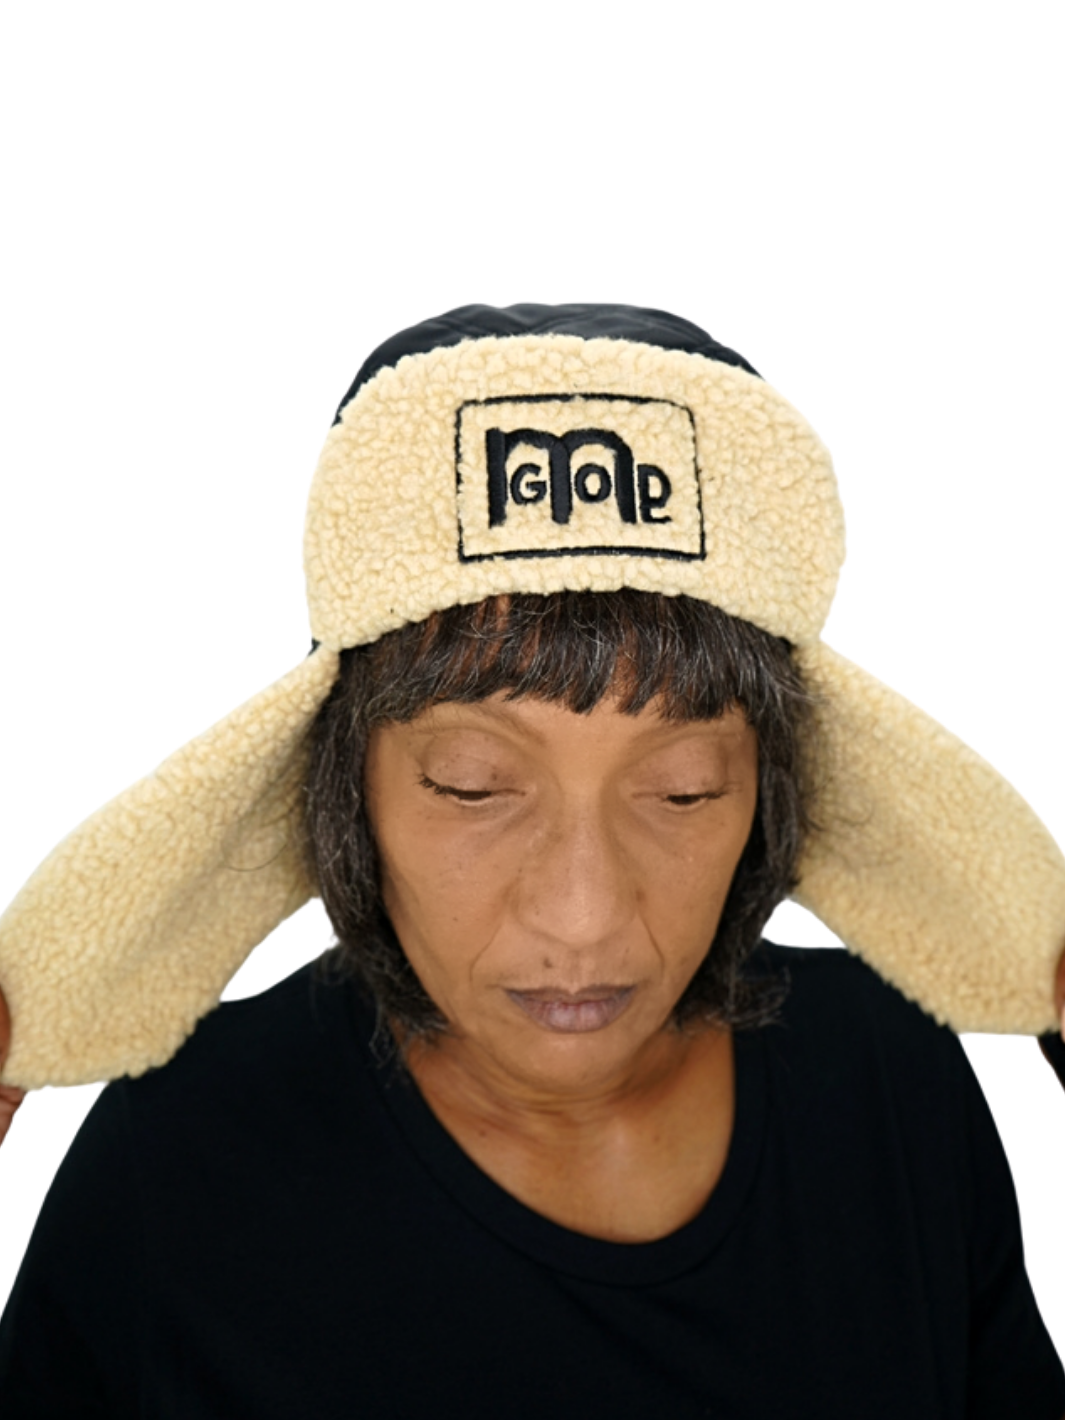 3 Panel Trapper Hat with Beige Sherpa lining and Black double stitch quilted diamond shape outer shell to provide ultimate quality with softness. Adjustable chin strap is embroidered with GODinme and the front panel has the GODinme logo.